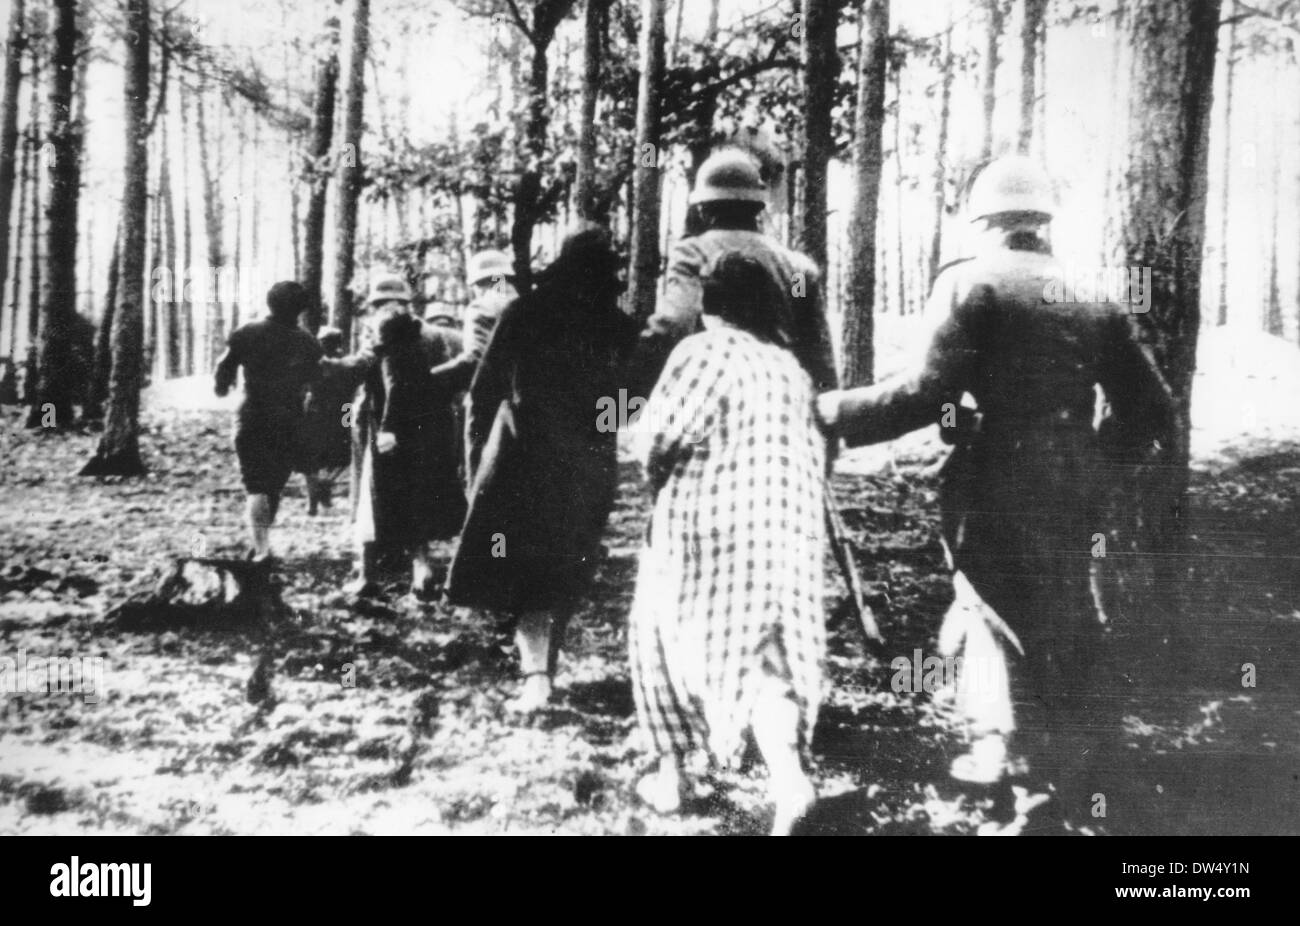 POLISH WOMEN are taken to be executed by German soldiers in 1941. Stock Photo